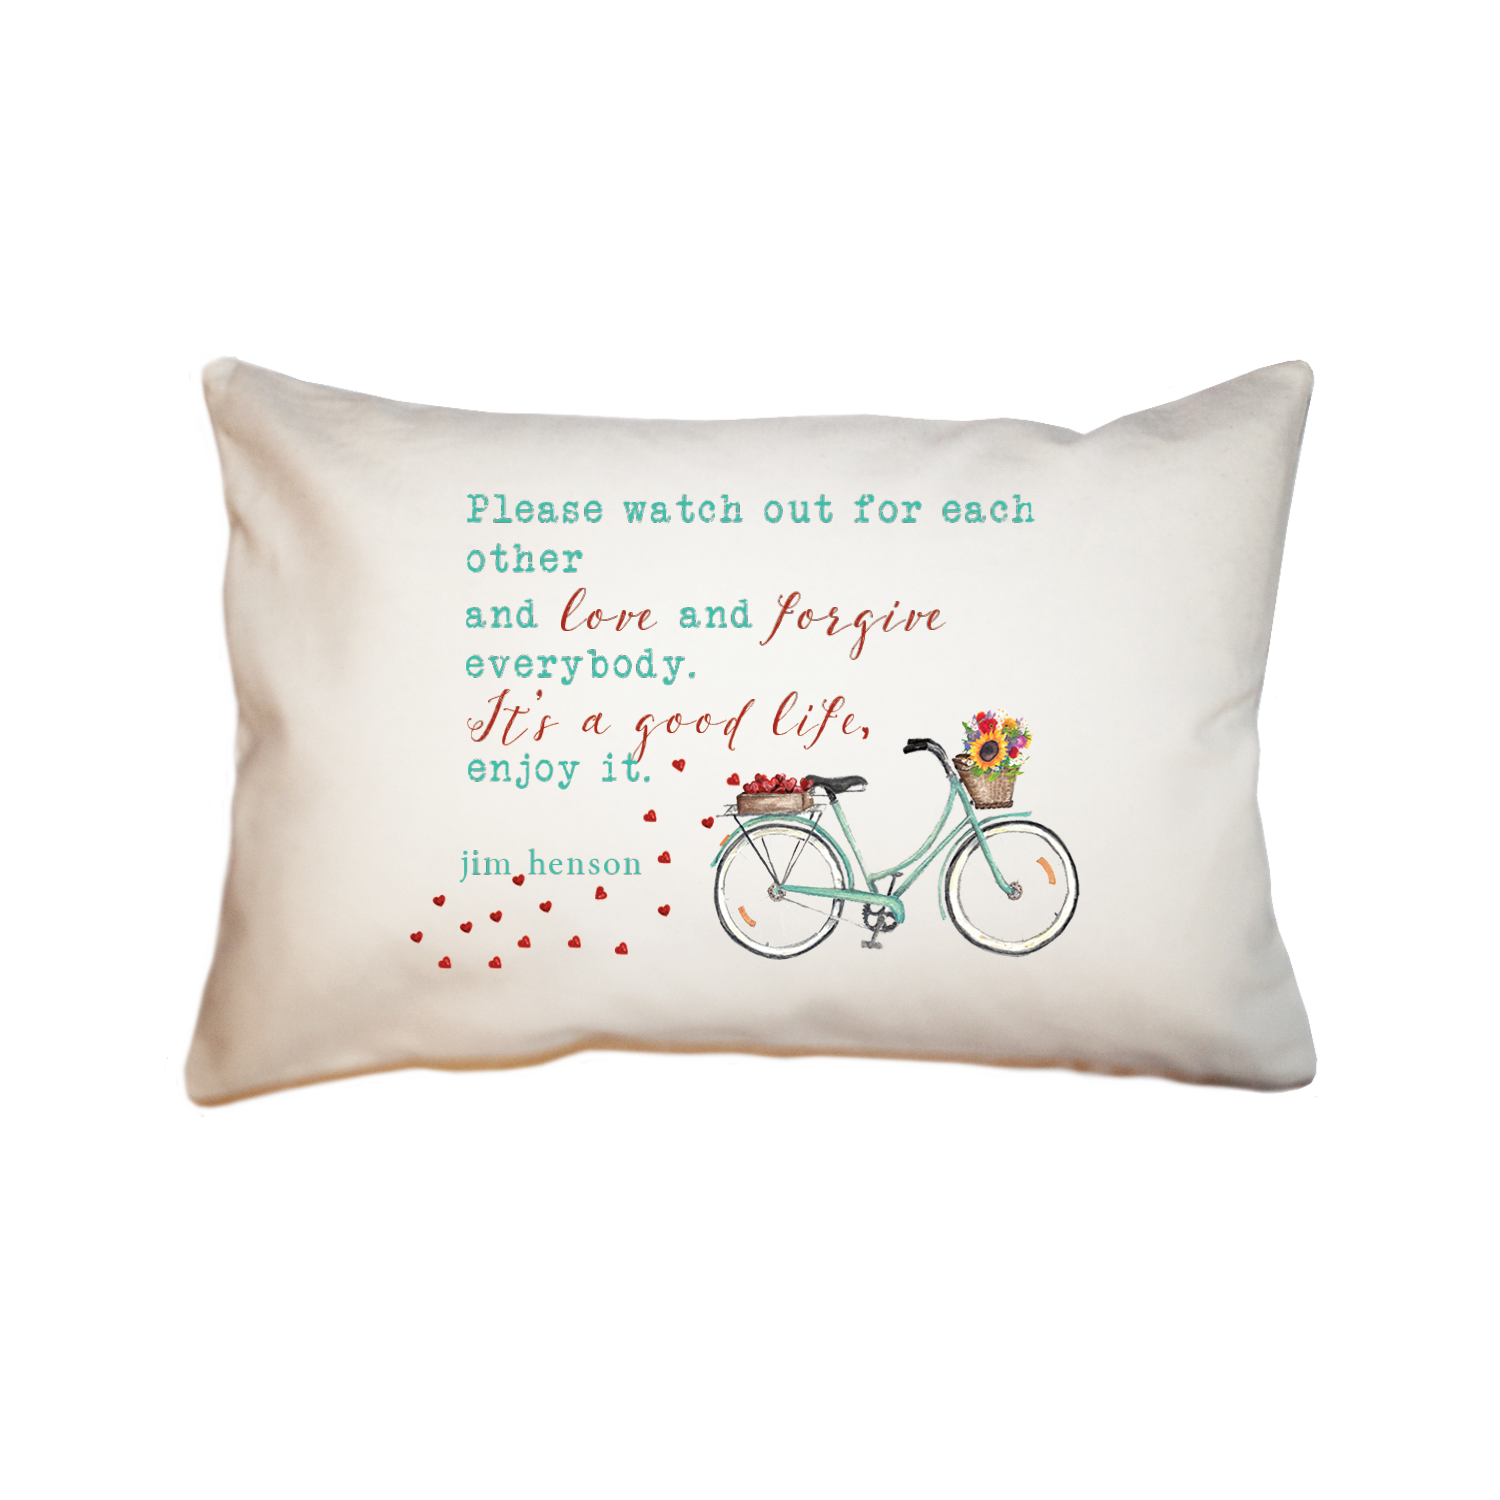 wildflower bike with jim henson quote large rectangle pillow